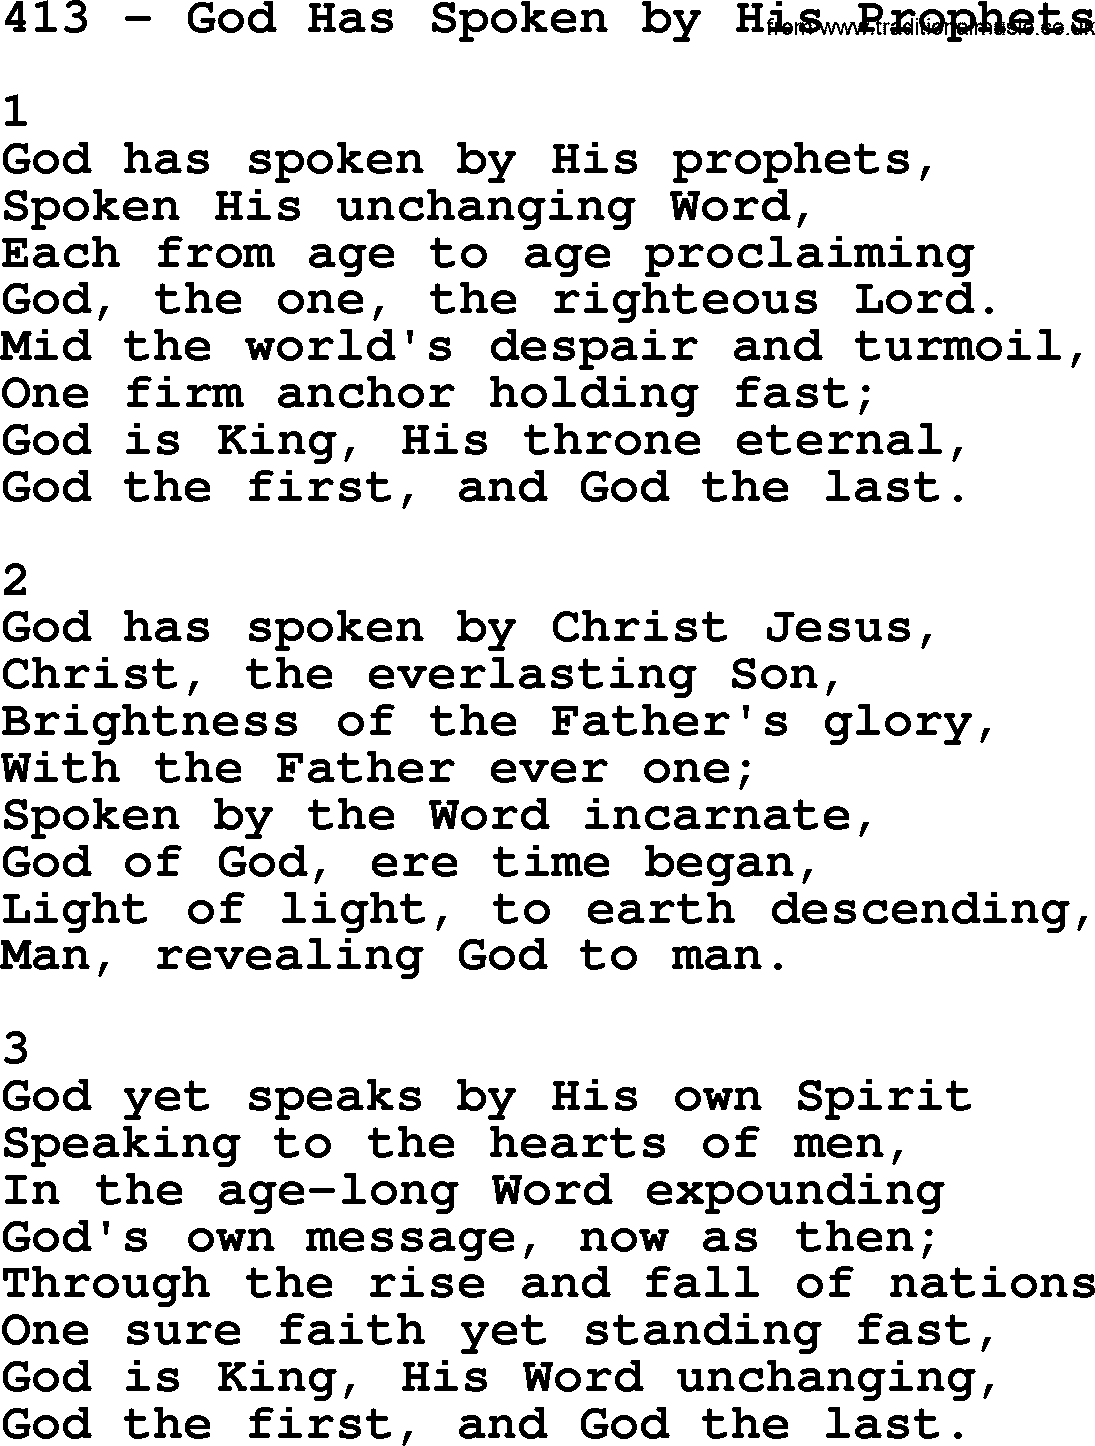 Complete Adventis Hymnal, title: 413-God Has Spoken By His Prophets, with lyrics, midi, mp3, powerpoints(PPT) and PDF,